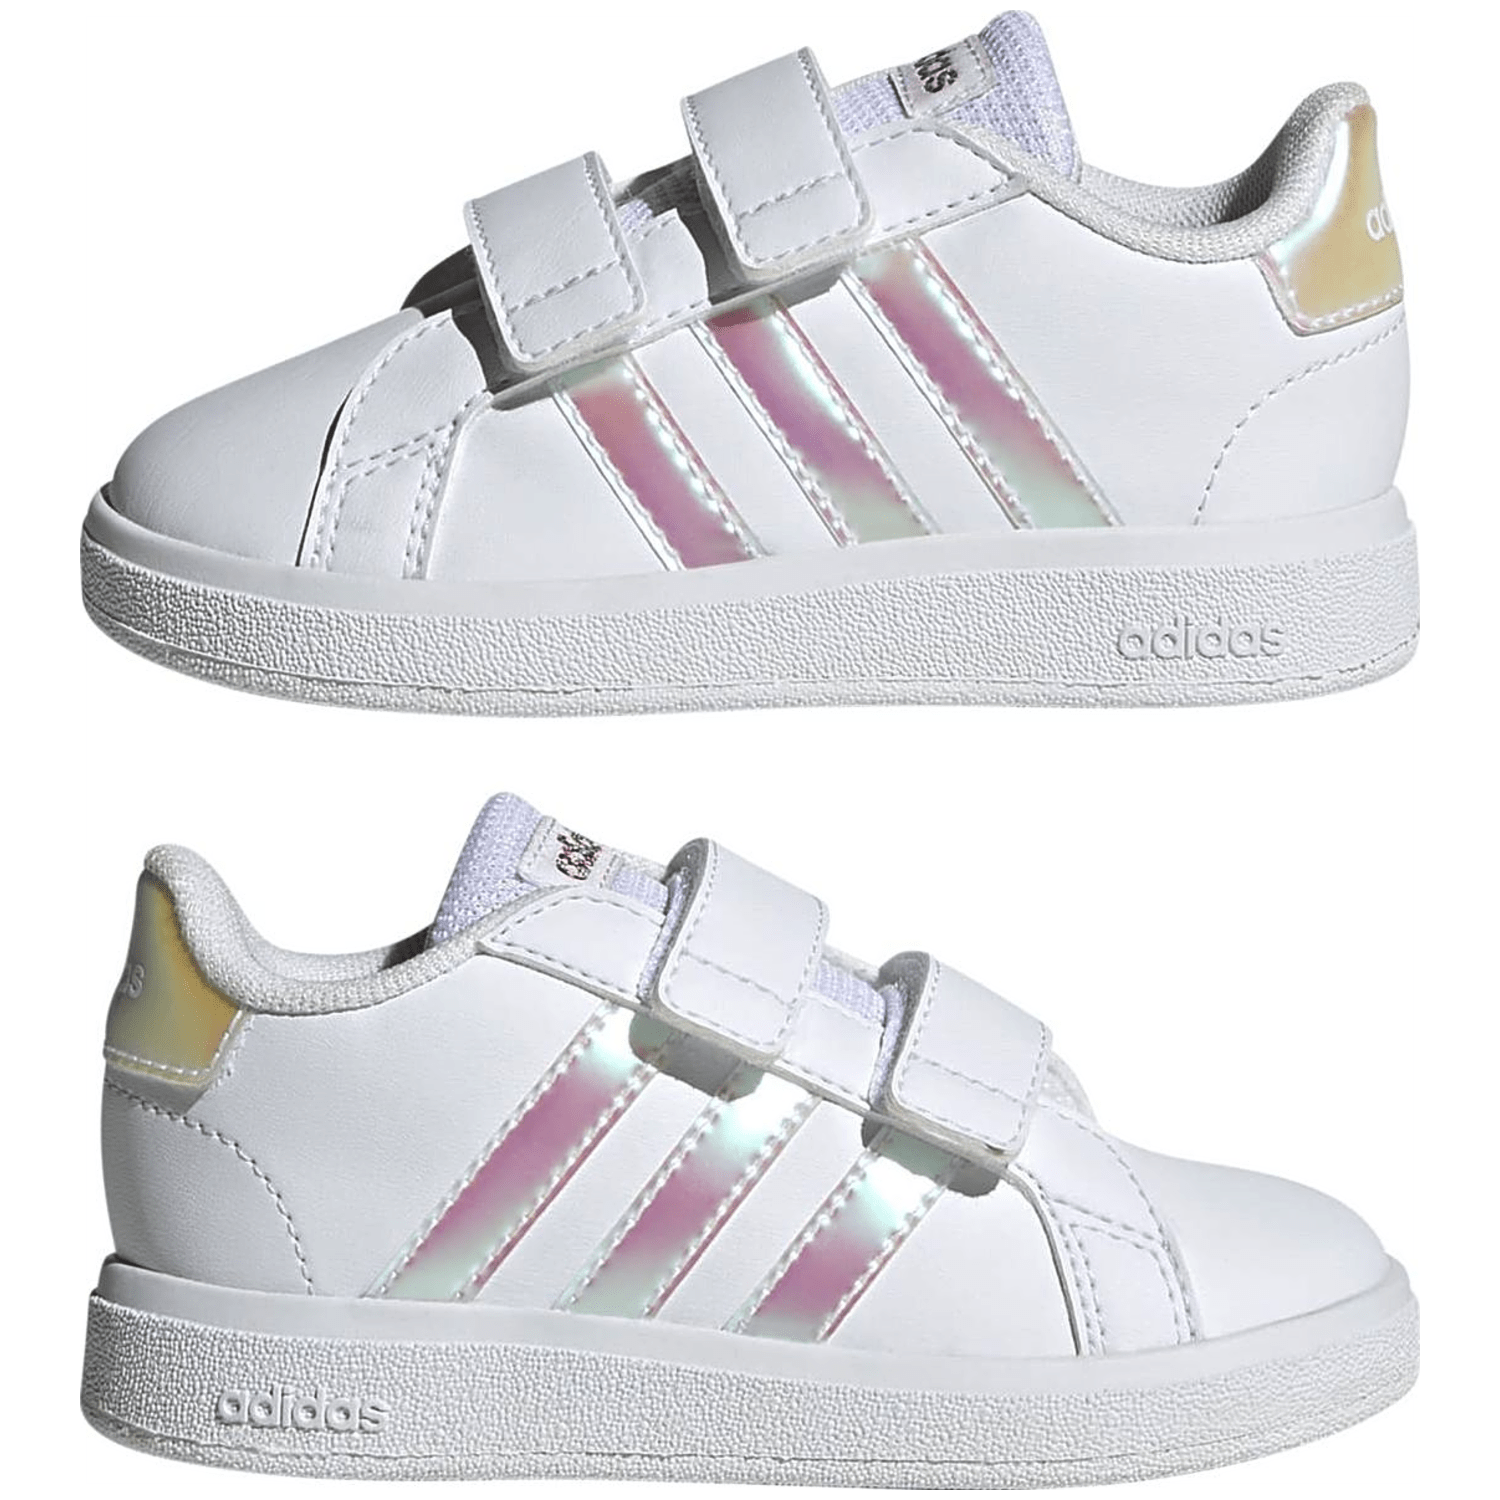 Adidas Grand Court Lifestyle Court Hook-and-Loop Schuh Kinder